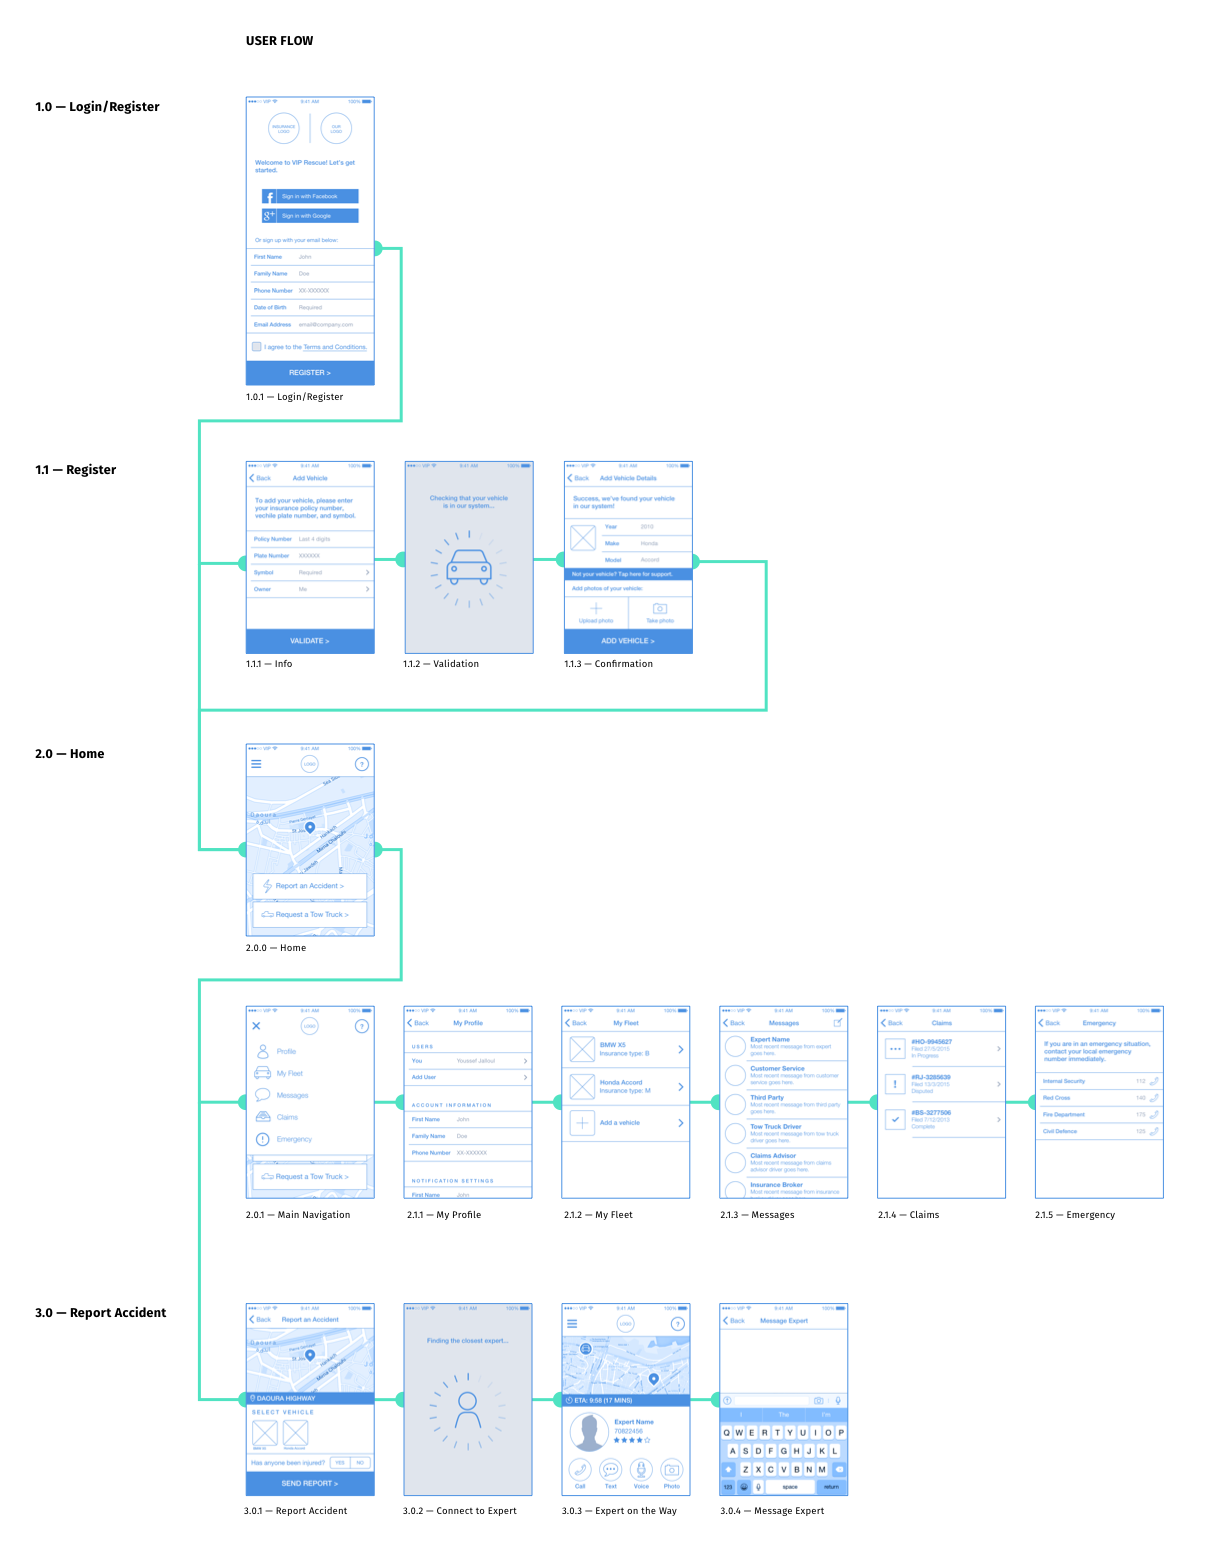 Initial wireframes of the user-facing app